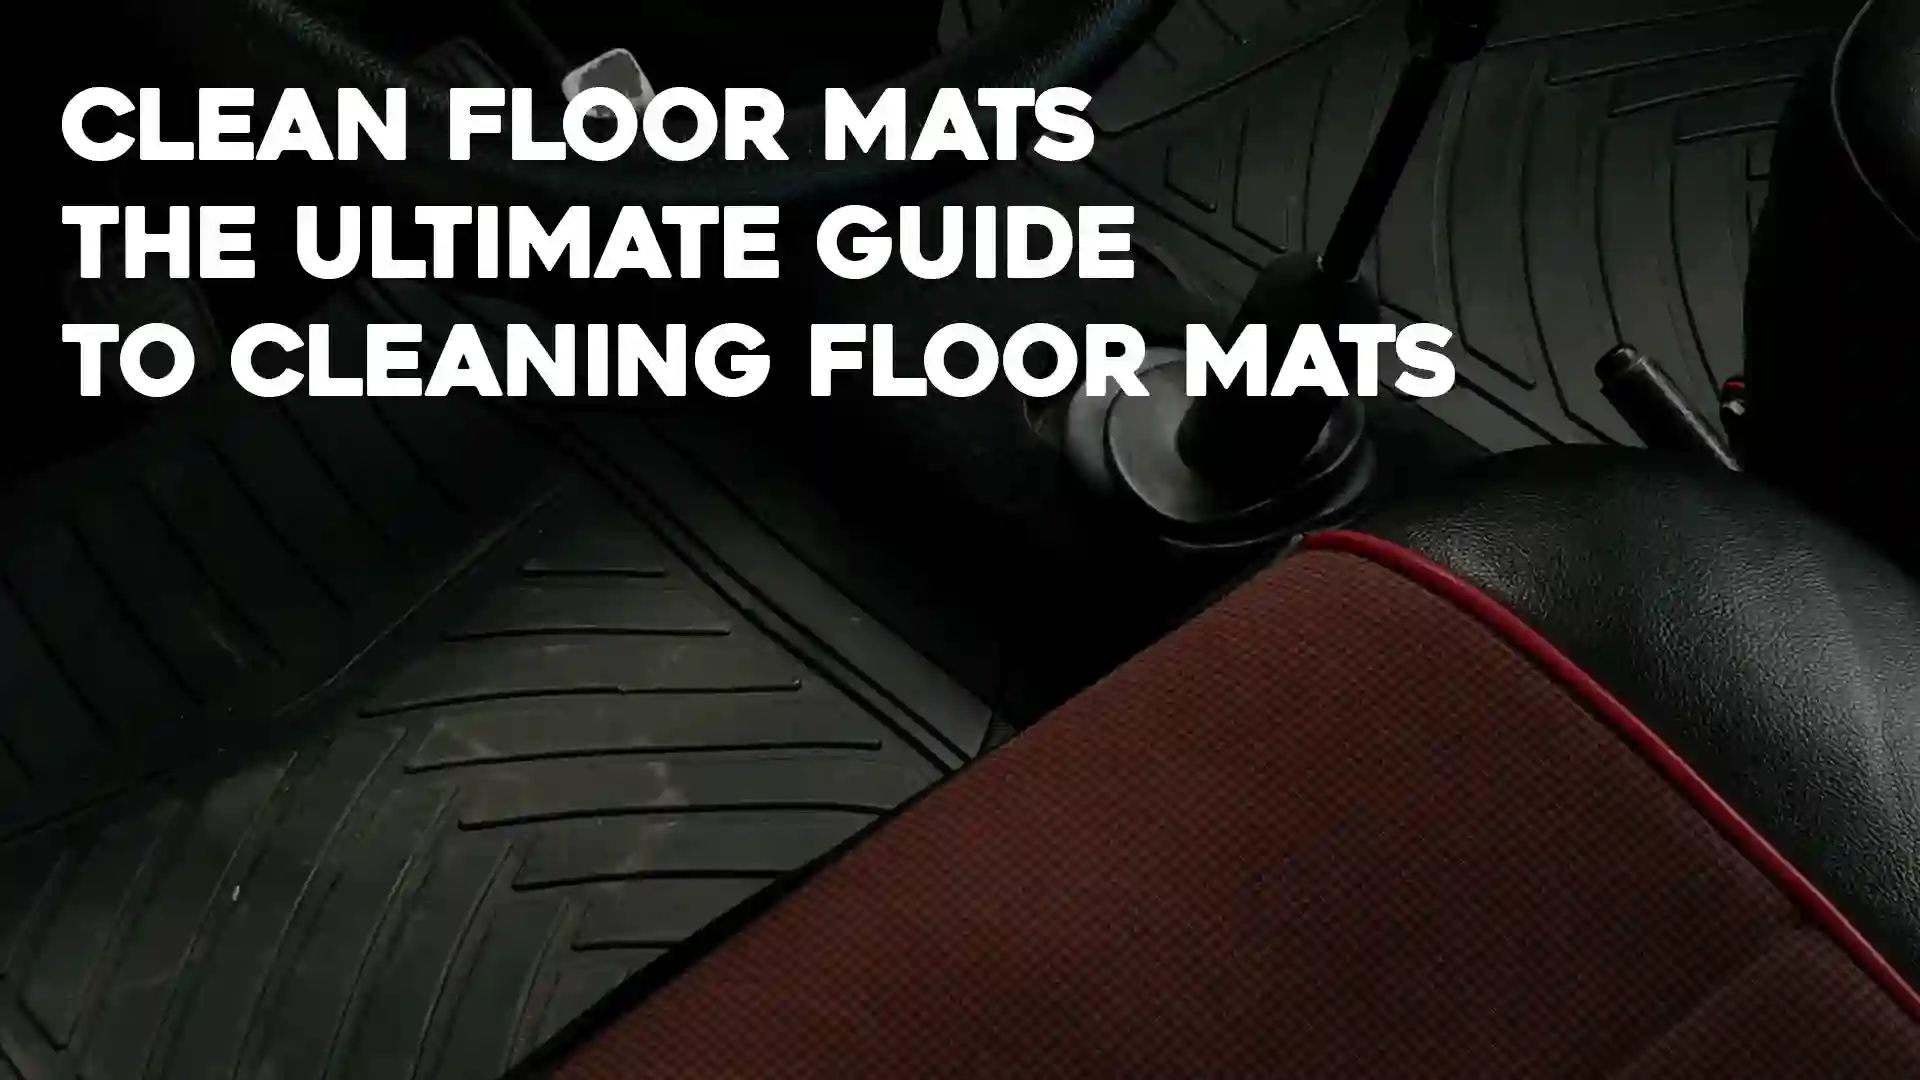 Clean Floor Mats – The Ultimate Guide to Cleaning Floor Mats